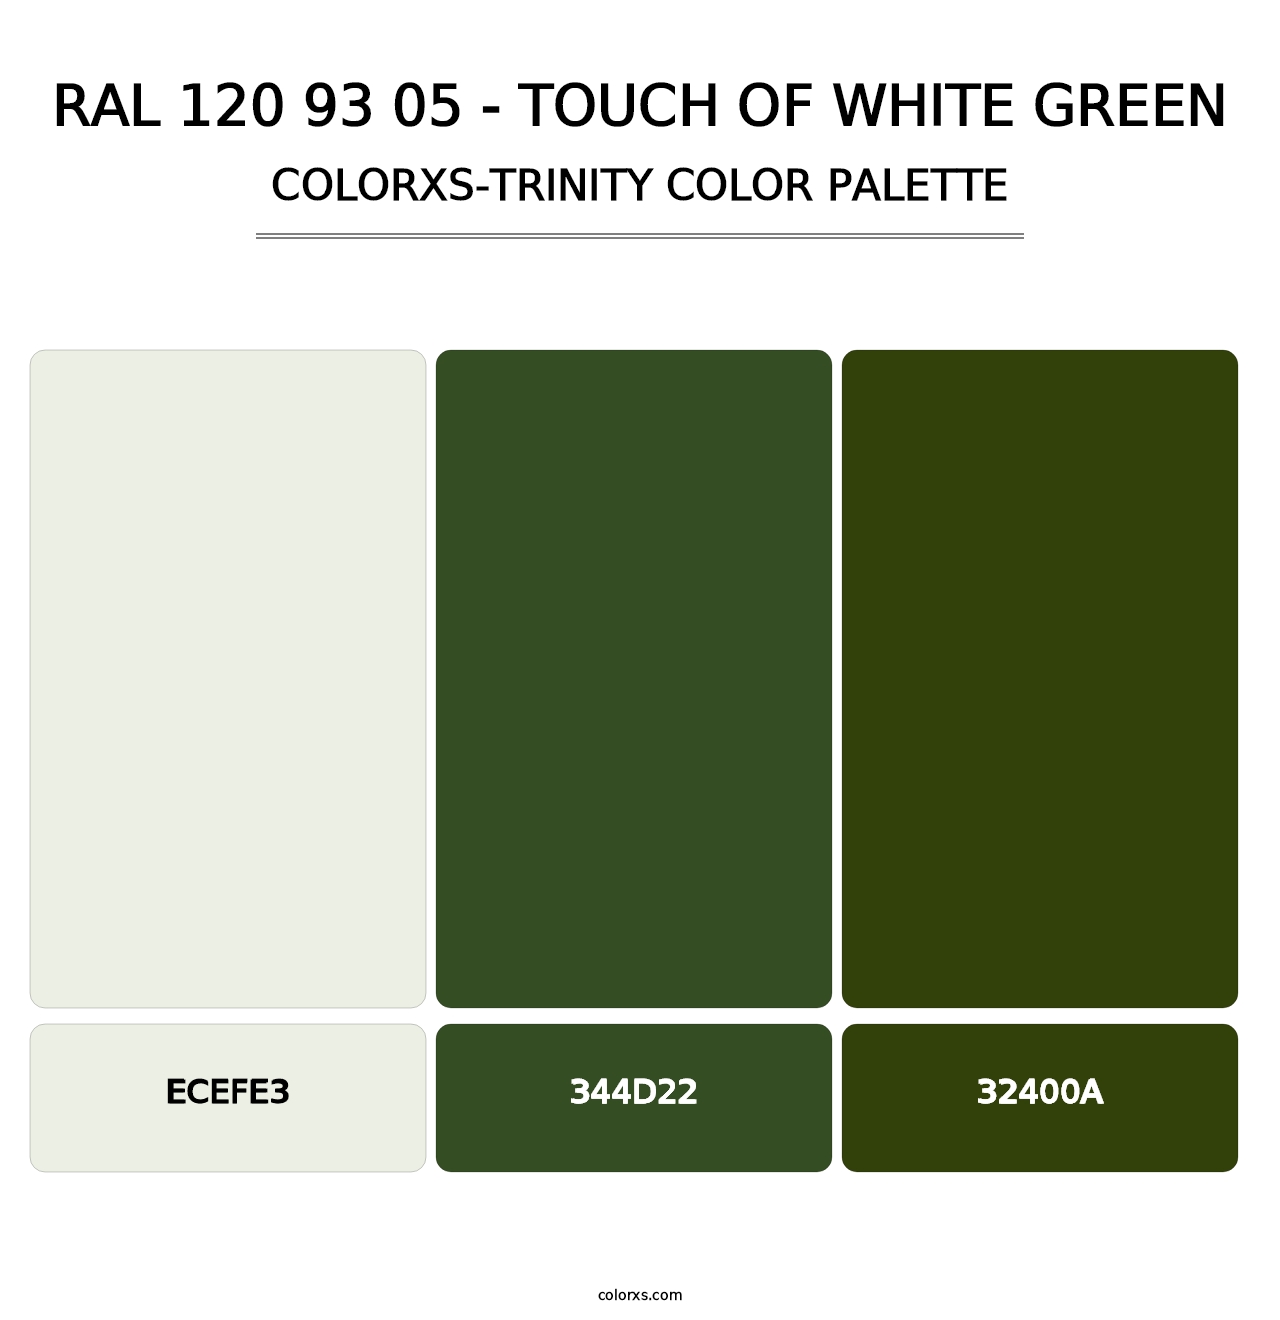 RAL 120 93 05 - Touch Of White Green - Colorxs Trinity Palette